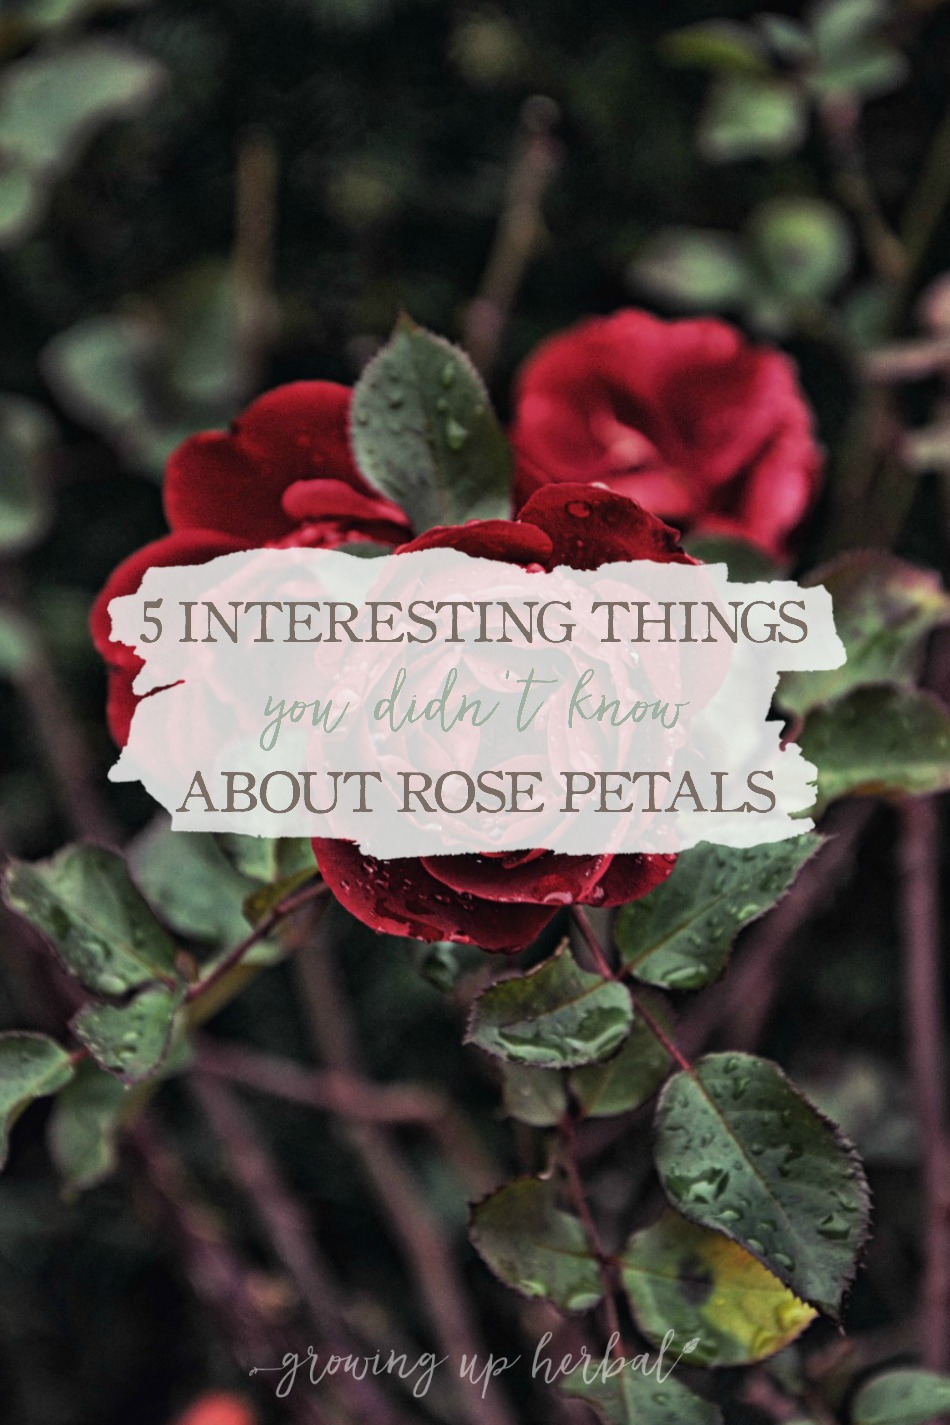 5 Interesting Things You Didn’t Know About Rose Petals | Growing Up Herbal | Do you know these 5 interesting things about rose petals? Plus, some ways to use them in herbal remedies as well!